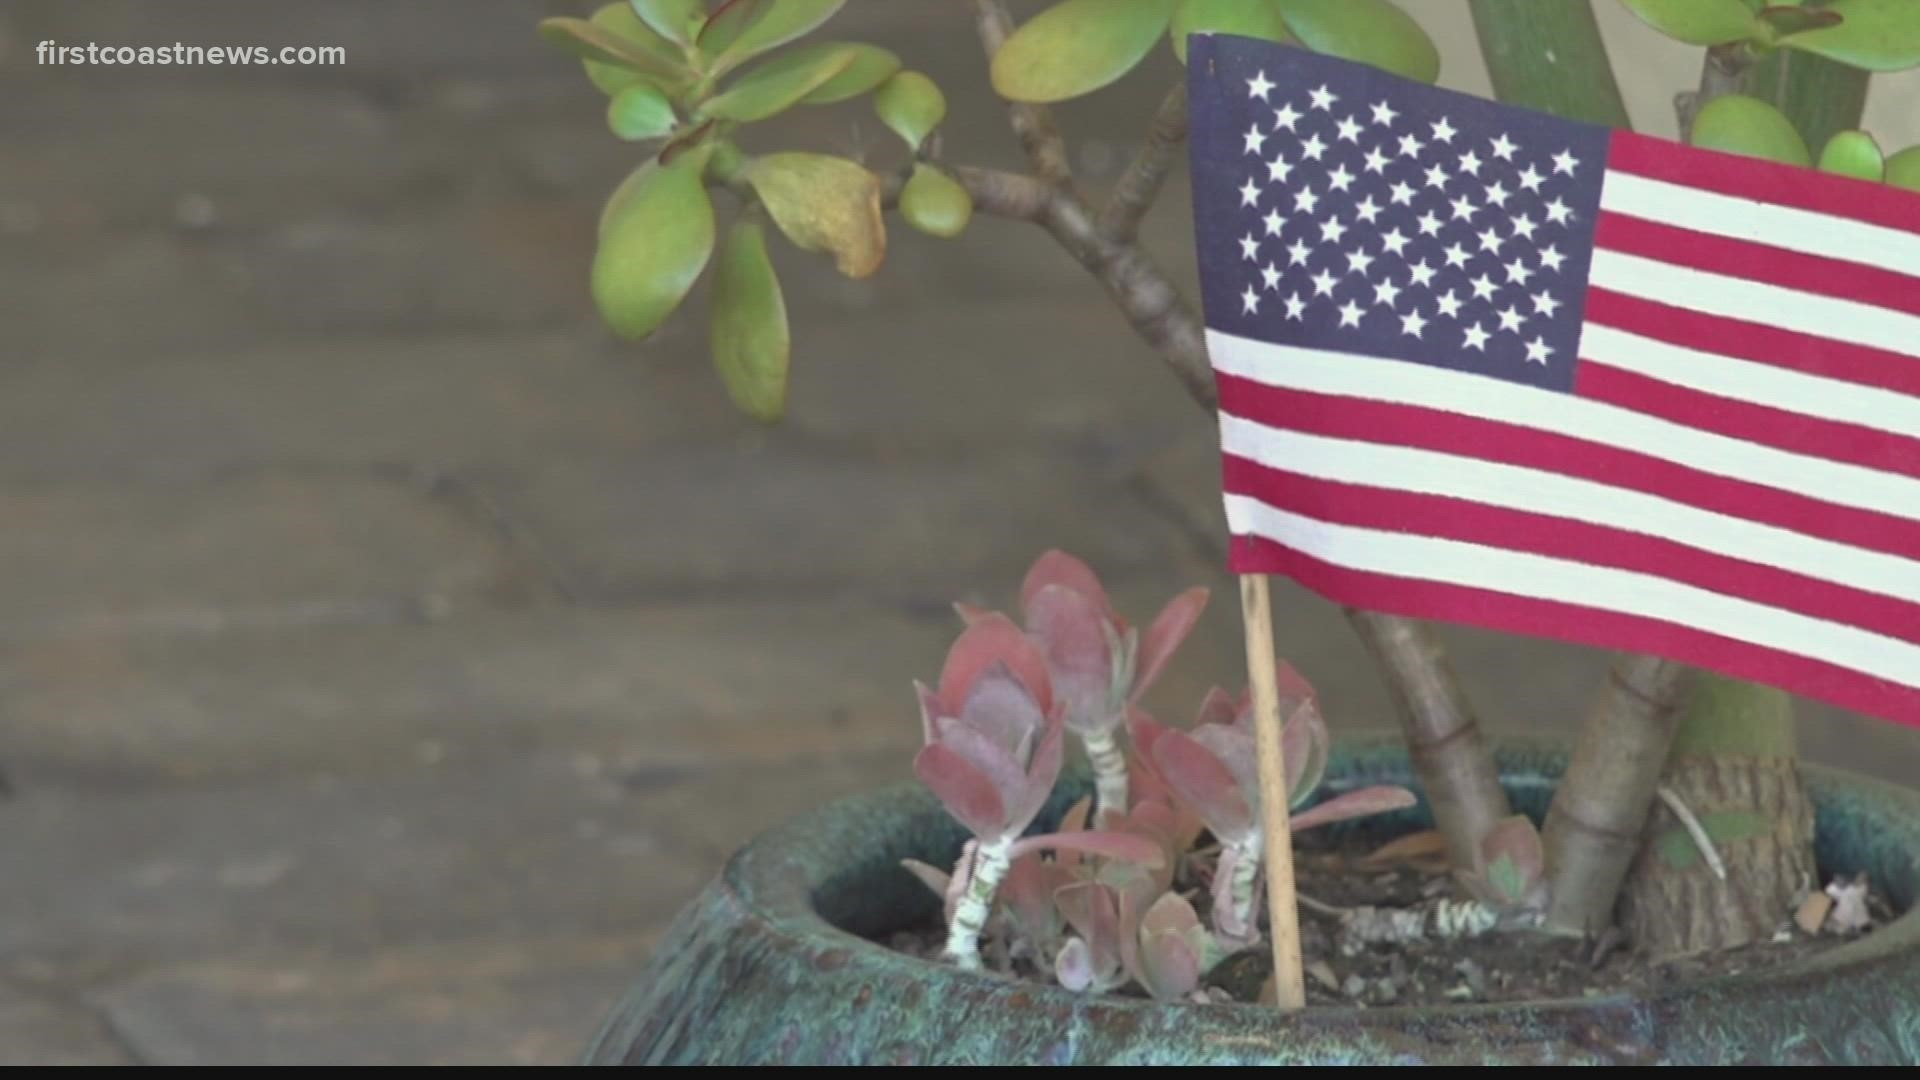 Larry Murphy was told to remove a 17-inch flag from a flower pot outside his door. The HOA told him to remove the flag, beginning a 12-year legal battle.